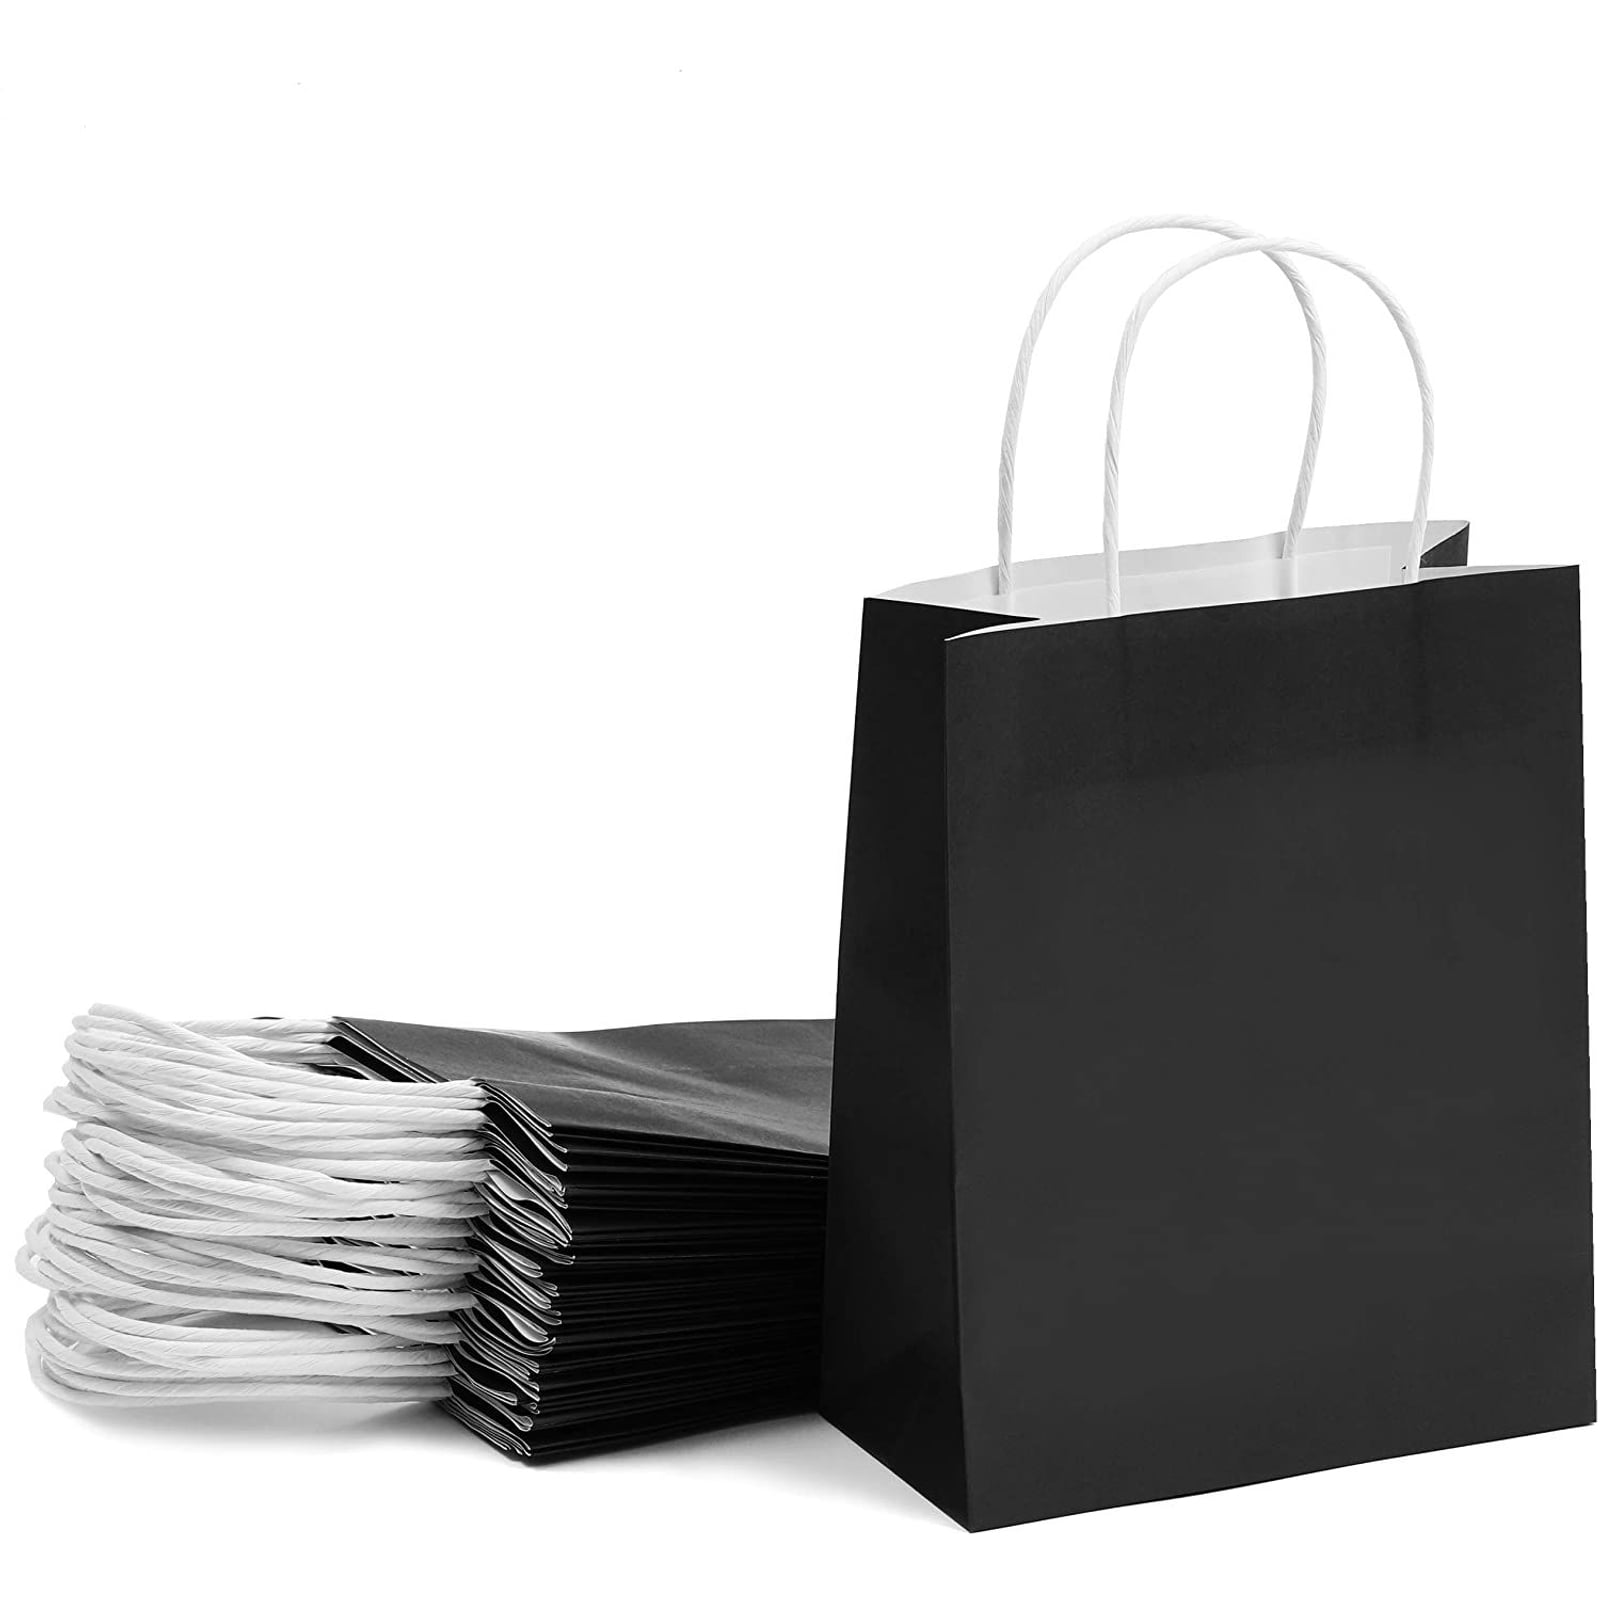 125 paper gift shopping bags with handles assortment bulk Black and white 